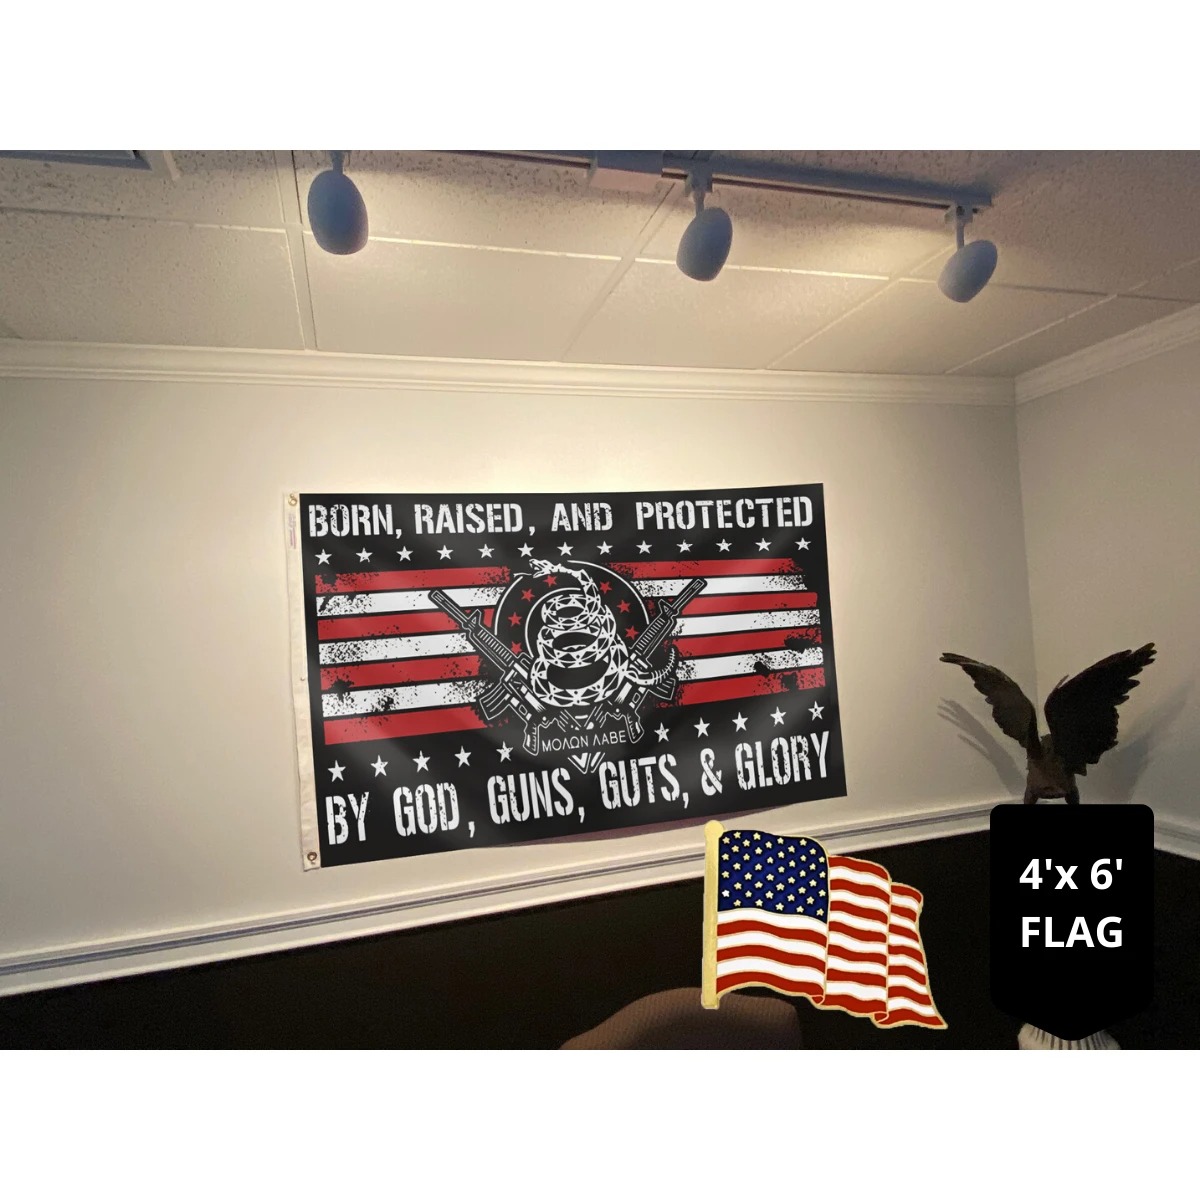 Born raised and protected by god guns guts and glory flag2